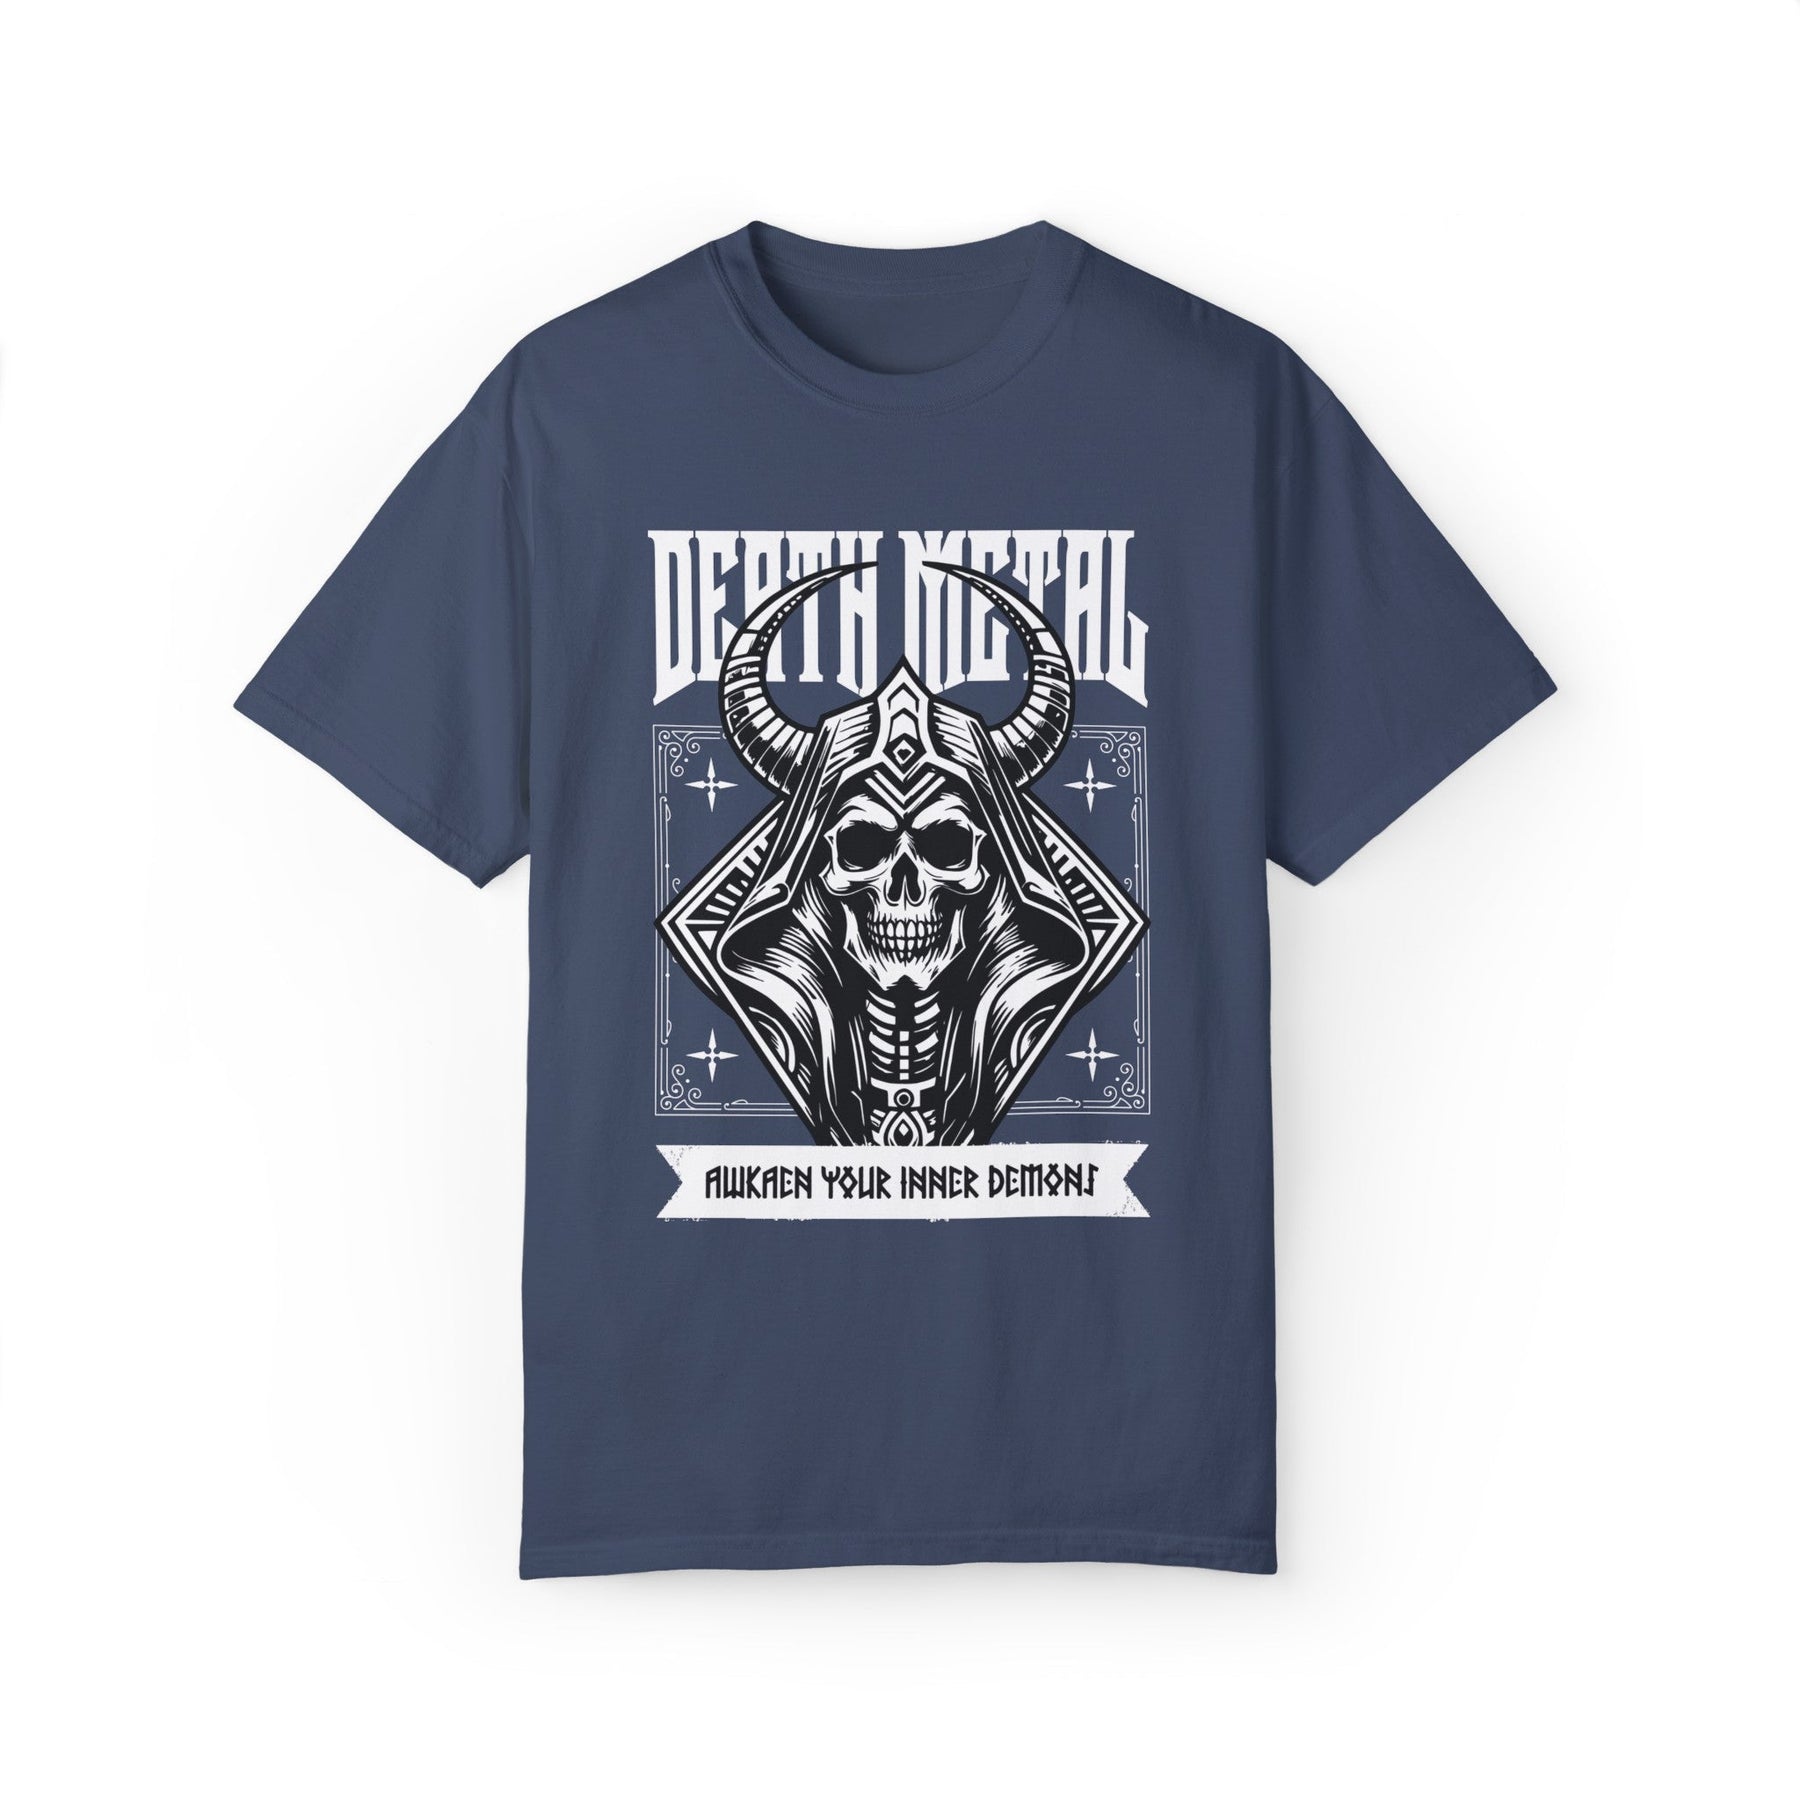 Death Metal Oversized Beefy Tee - Goth Cloth Co.T - Shirt40793250306787240443